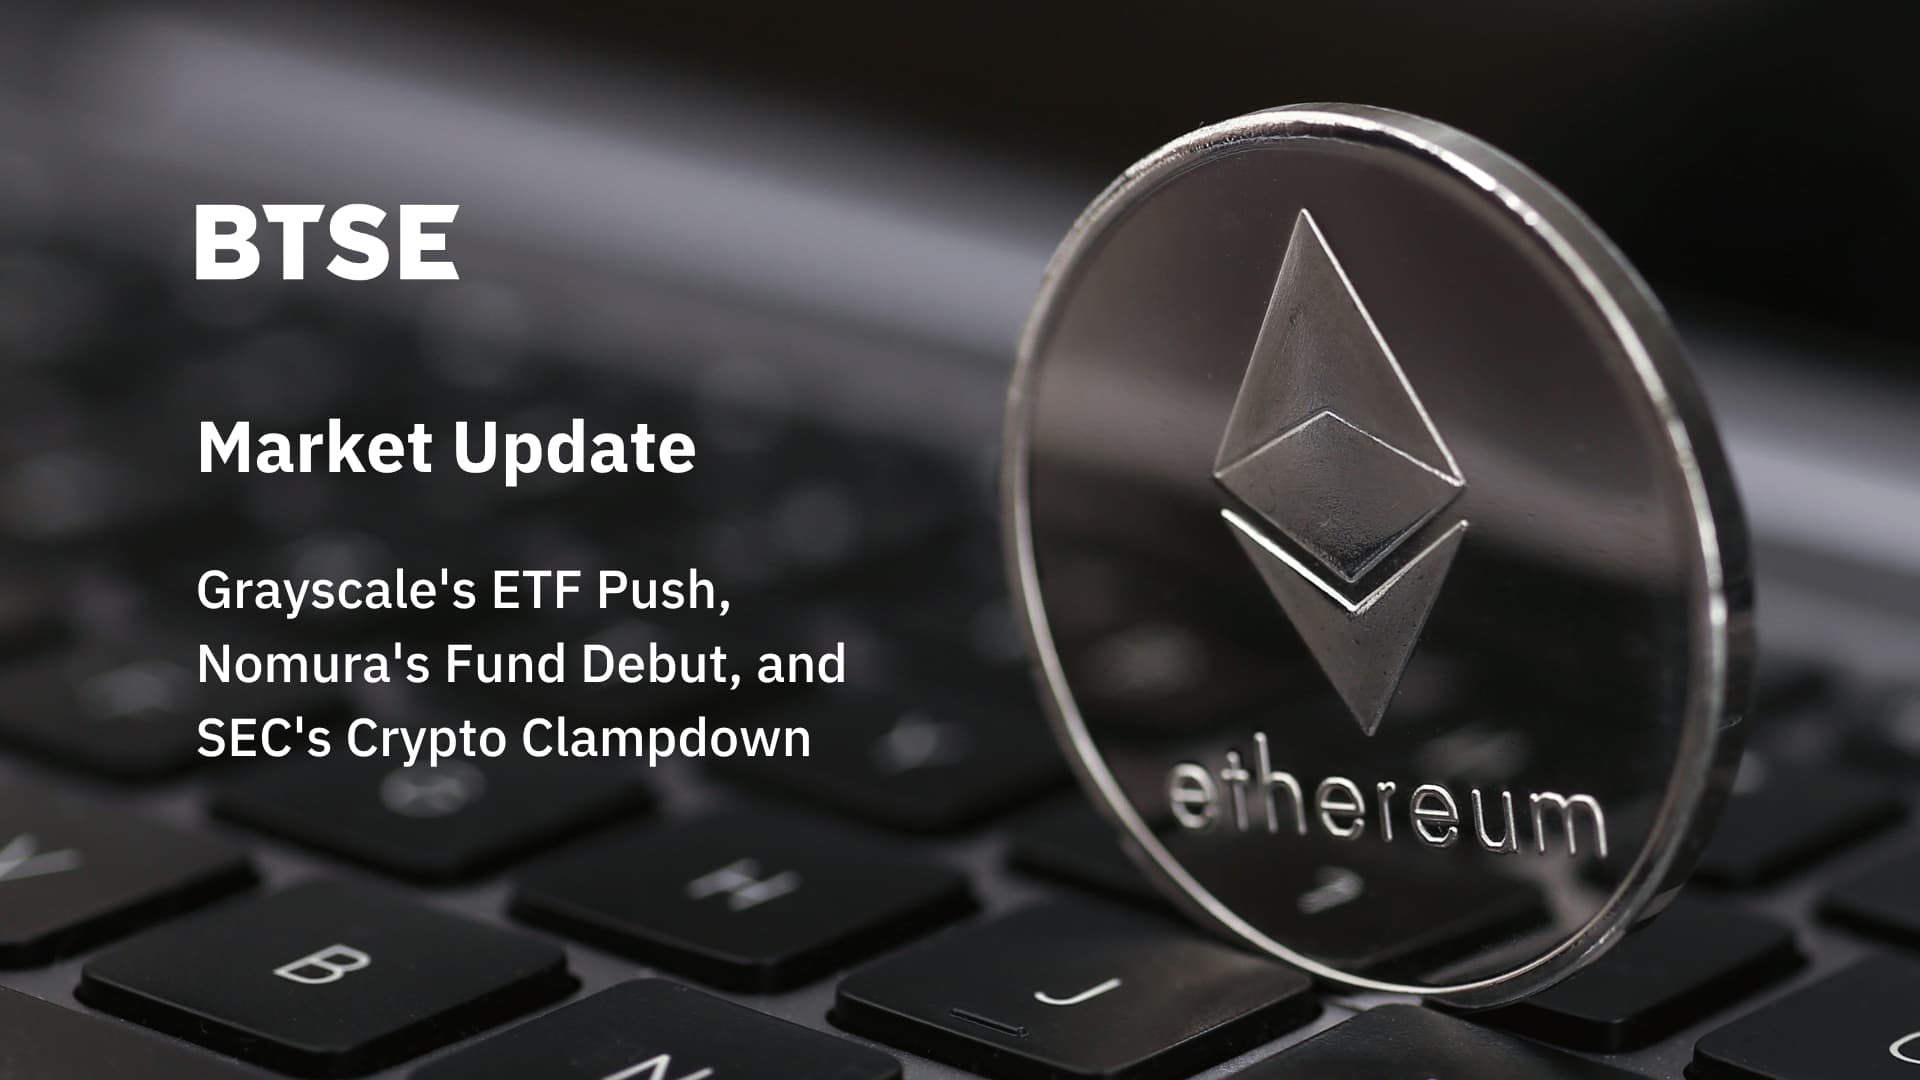 Grayscale's ETF Push, Nomura's Fund Debut, and SEC's Crypto Clampdown